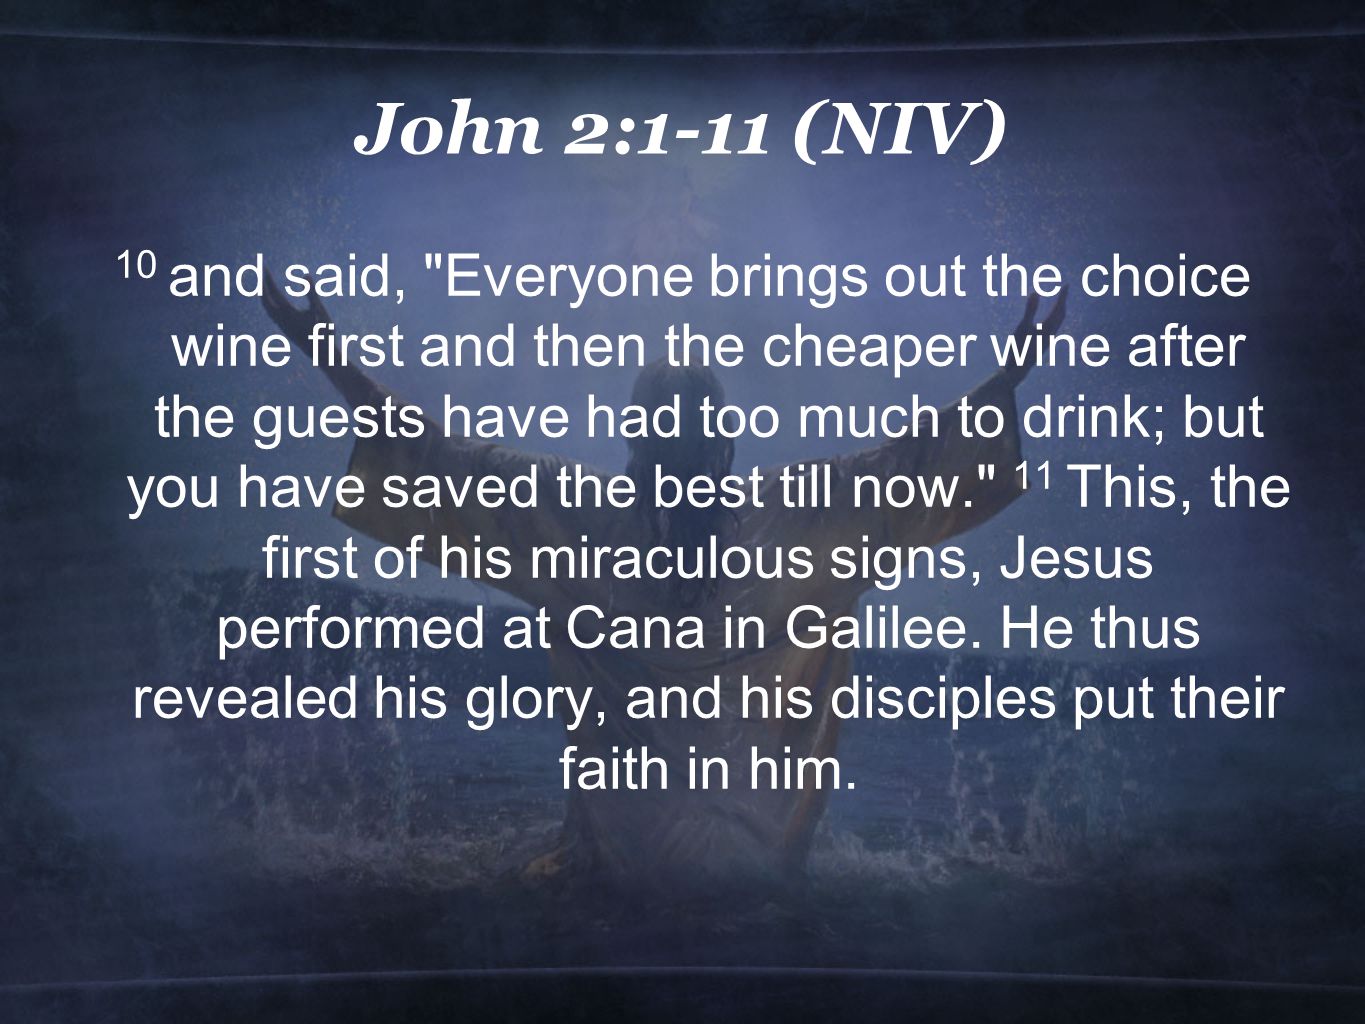 John 2:1-11 (NIV) 10 and said, Everyone brings out the choice wine first and then the cheaper wine after the guests have had too much to drink; but you have saved the best till now. 11 This, the first of his miraculous signs, Jesus performed at Cana in Galilee.